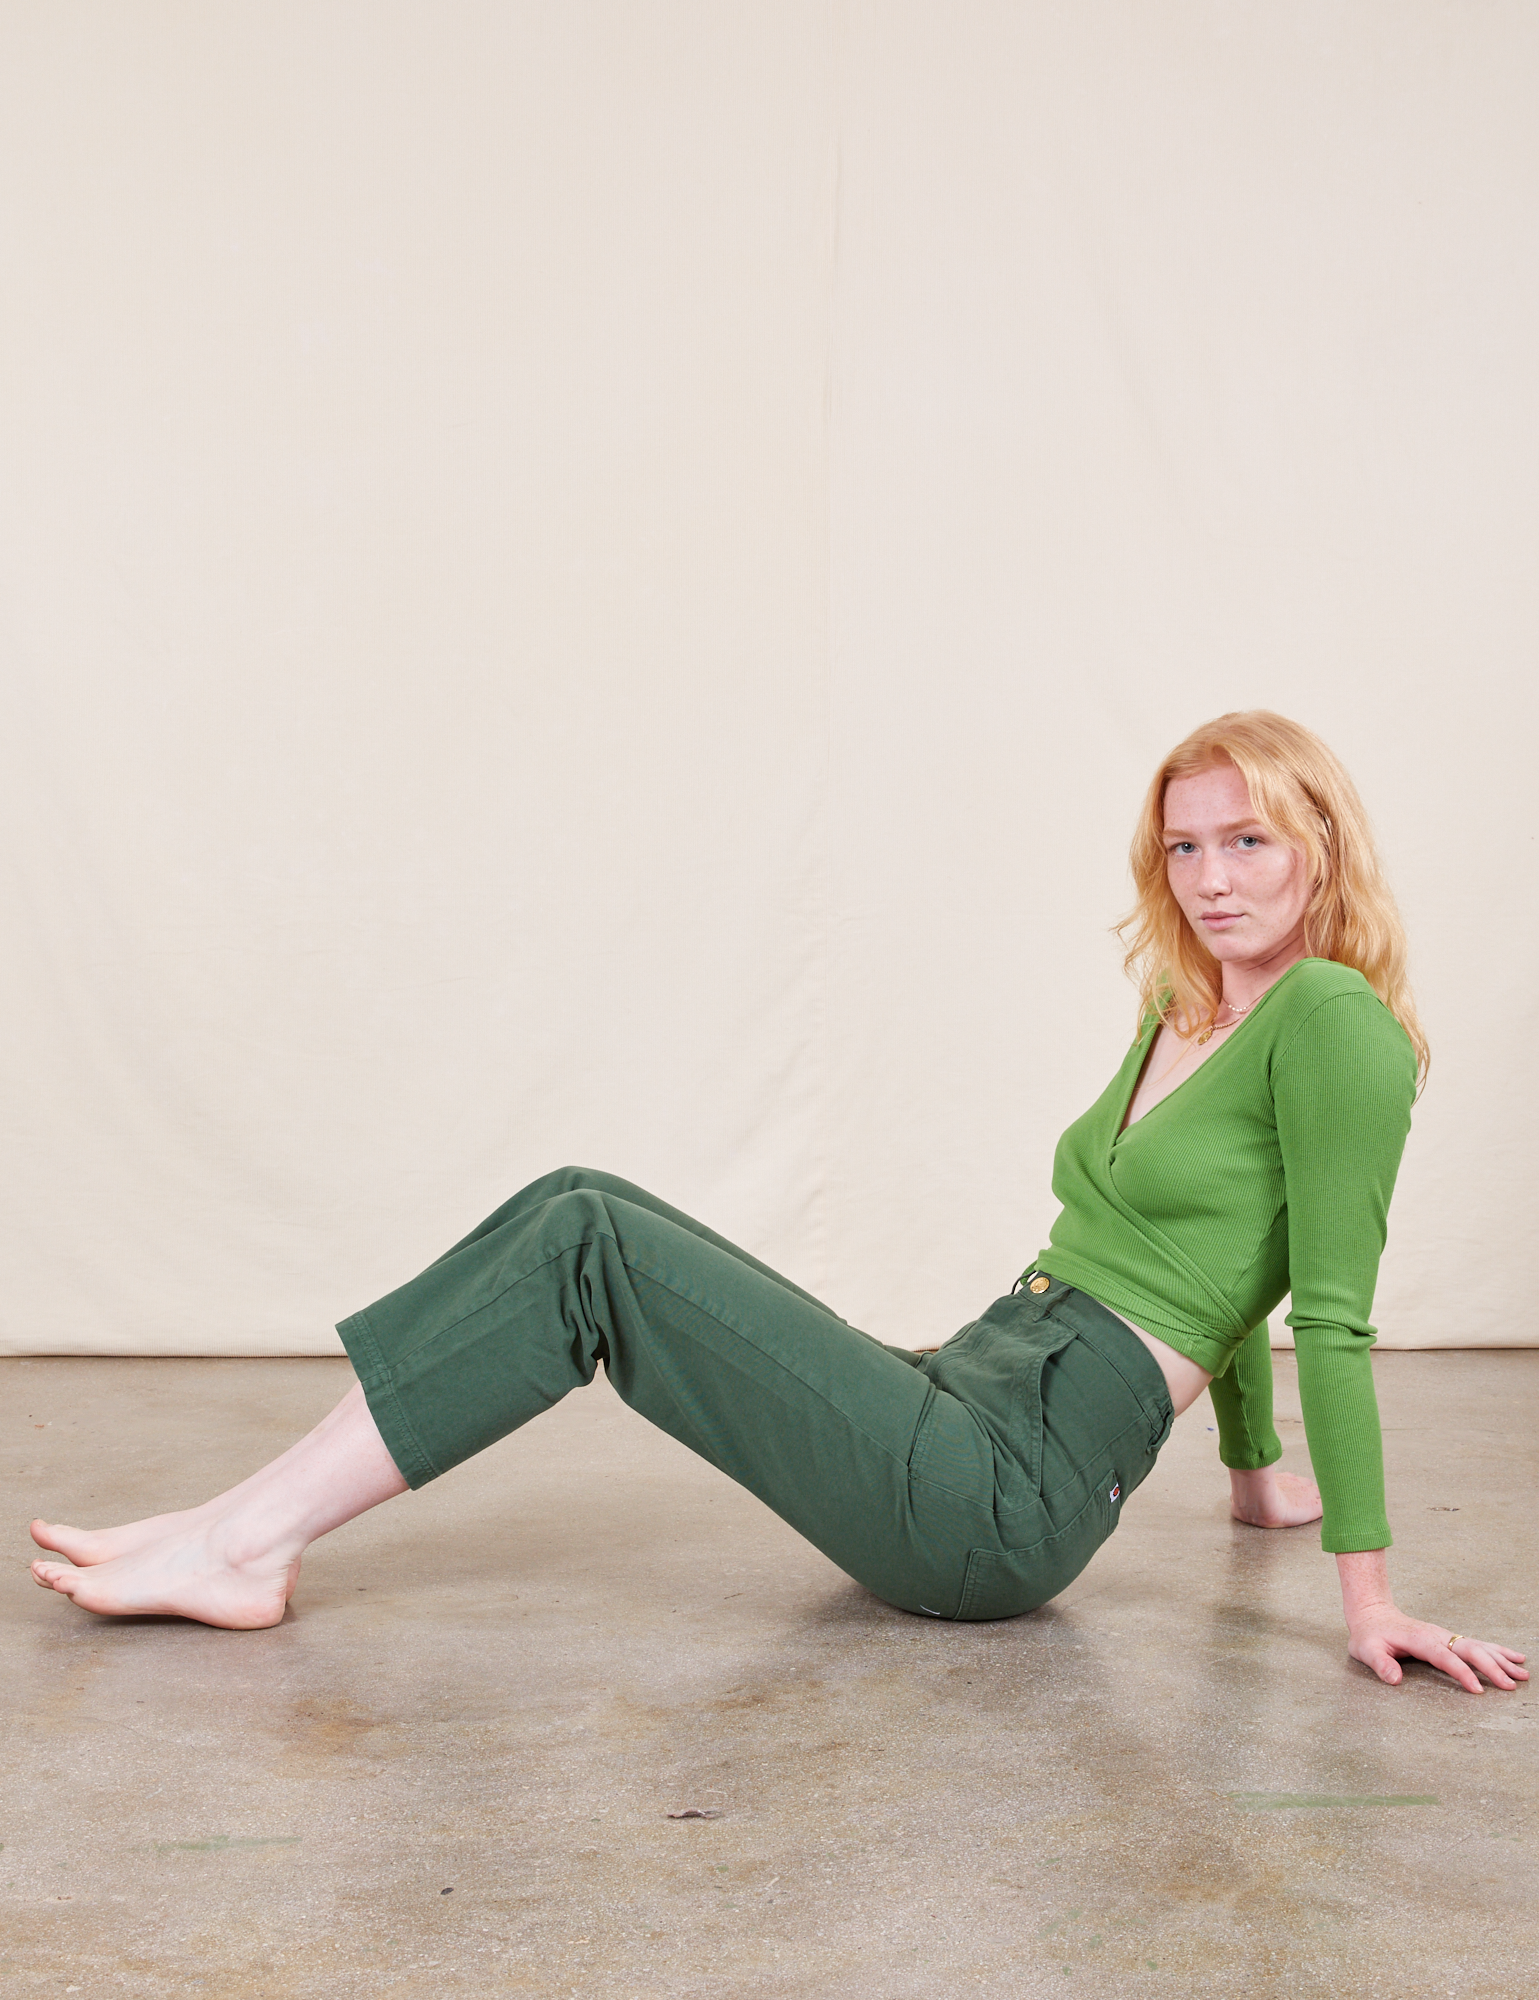 Margaret is wearing Work Pants in Dark Emerald Green and bright olive Wrap Top